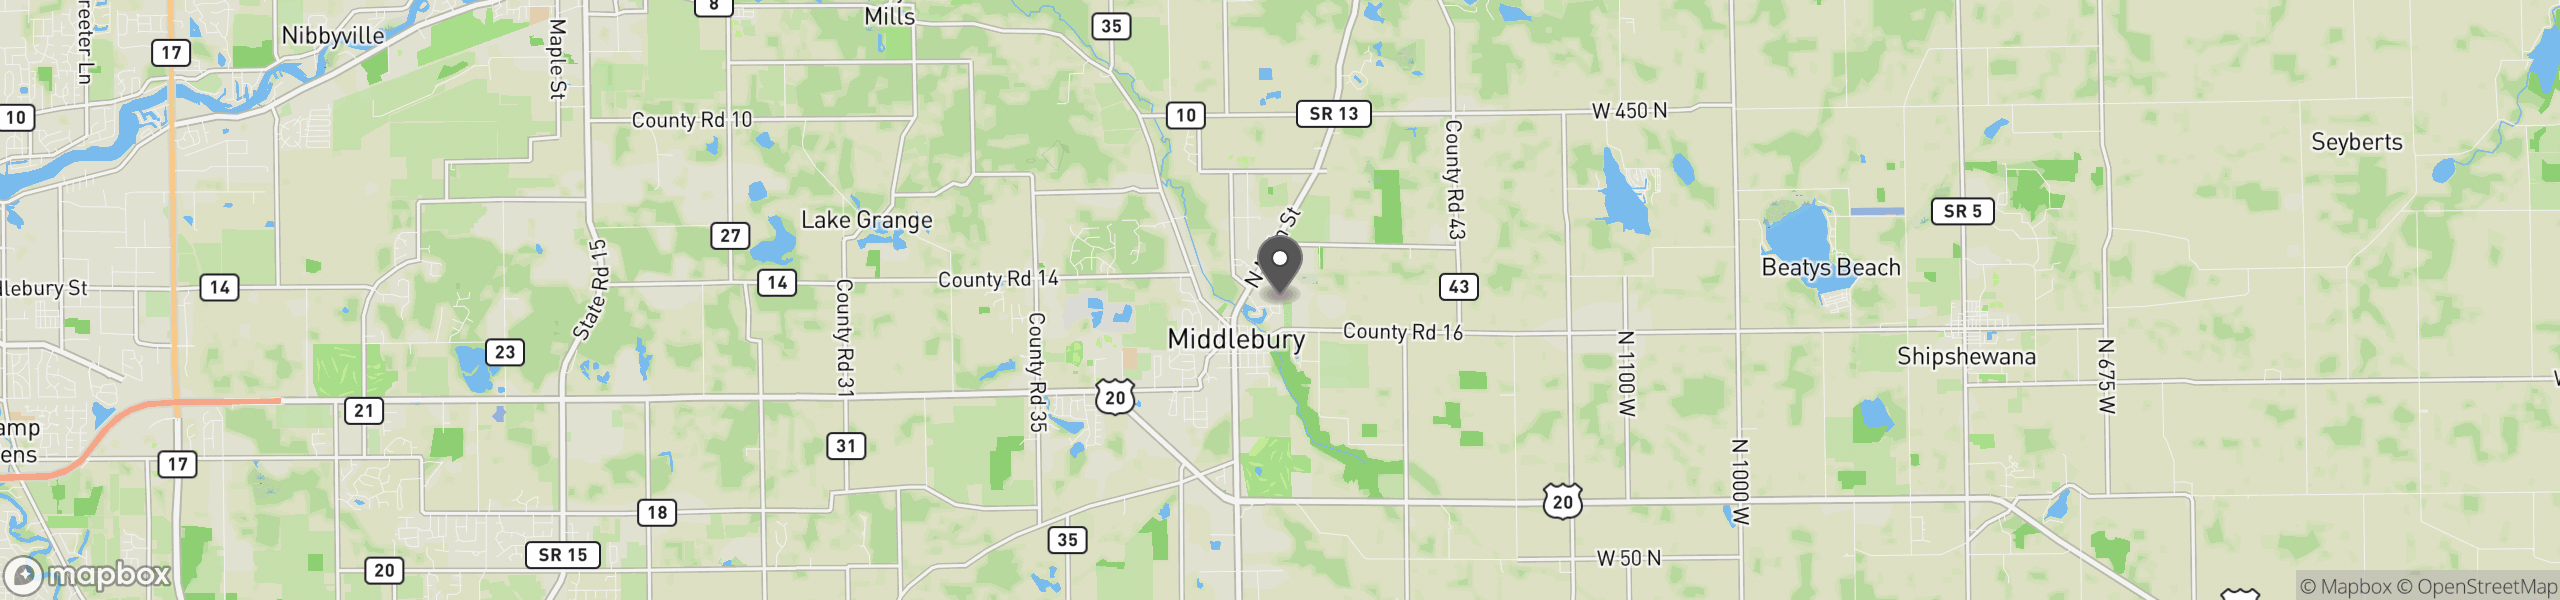 Middlebury, IN 46540